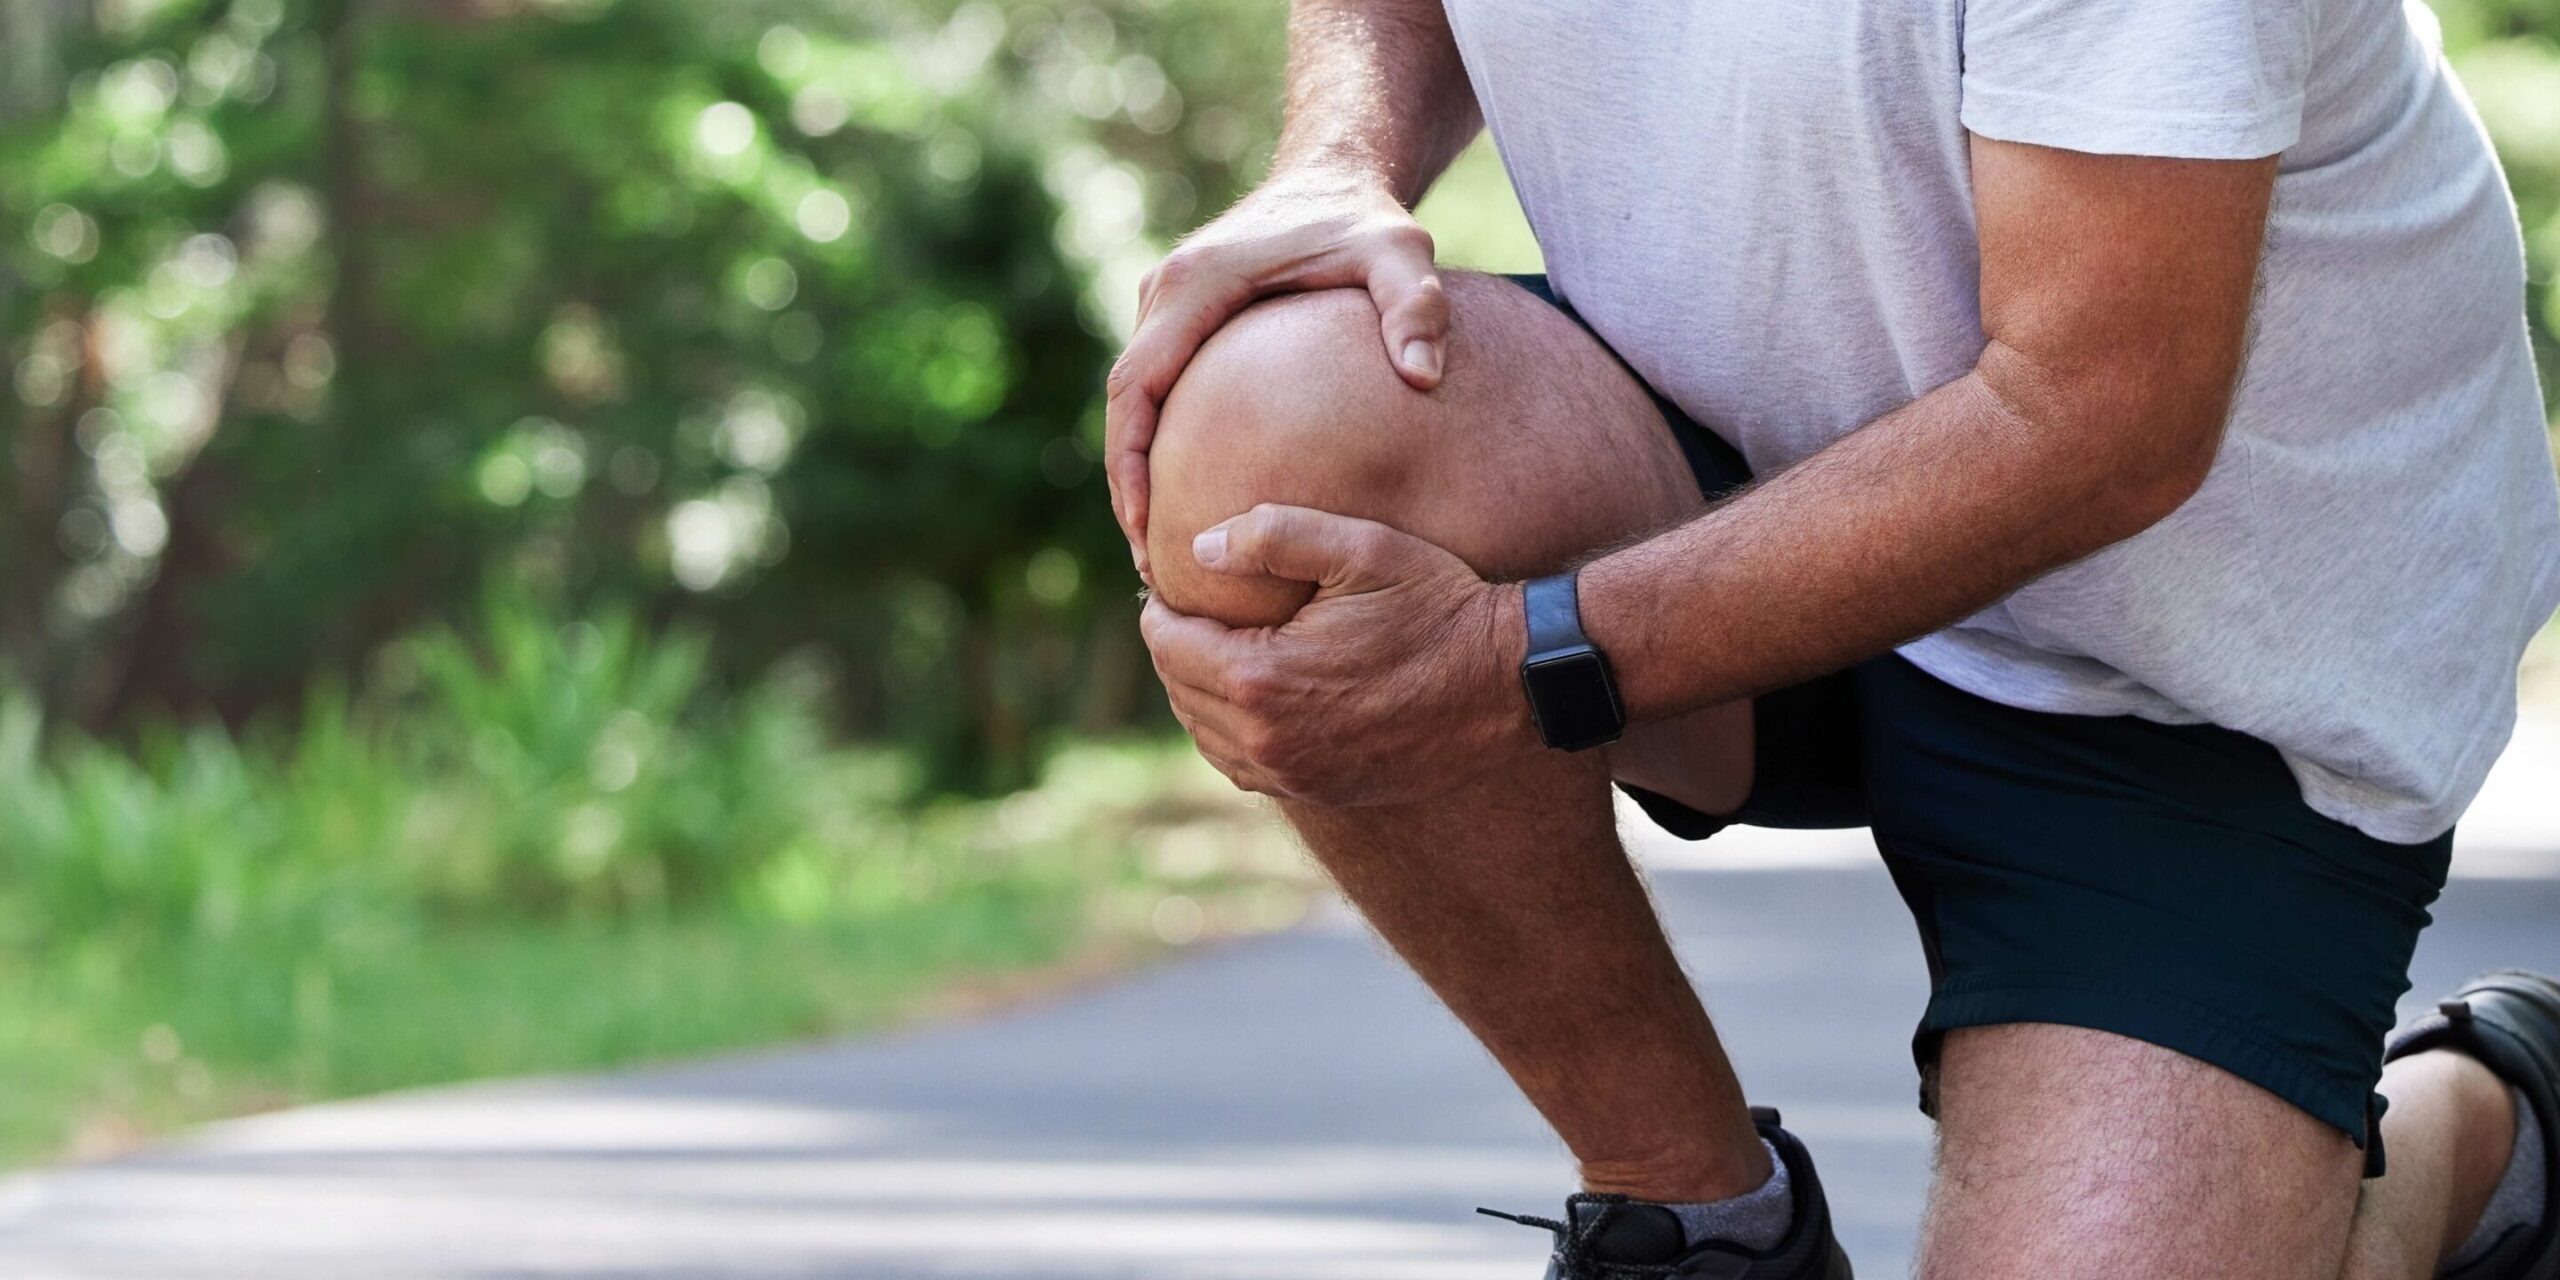 What are the Most Common Knee Pain Causes?